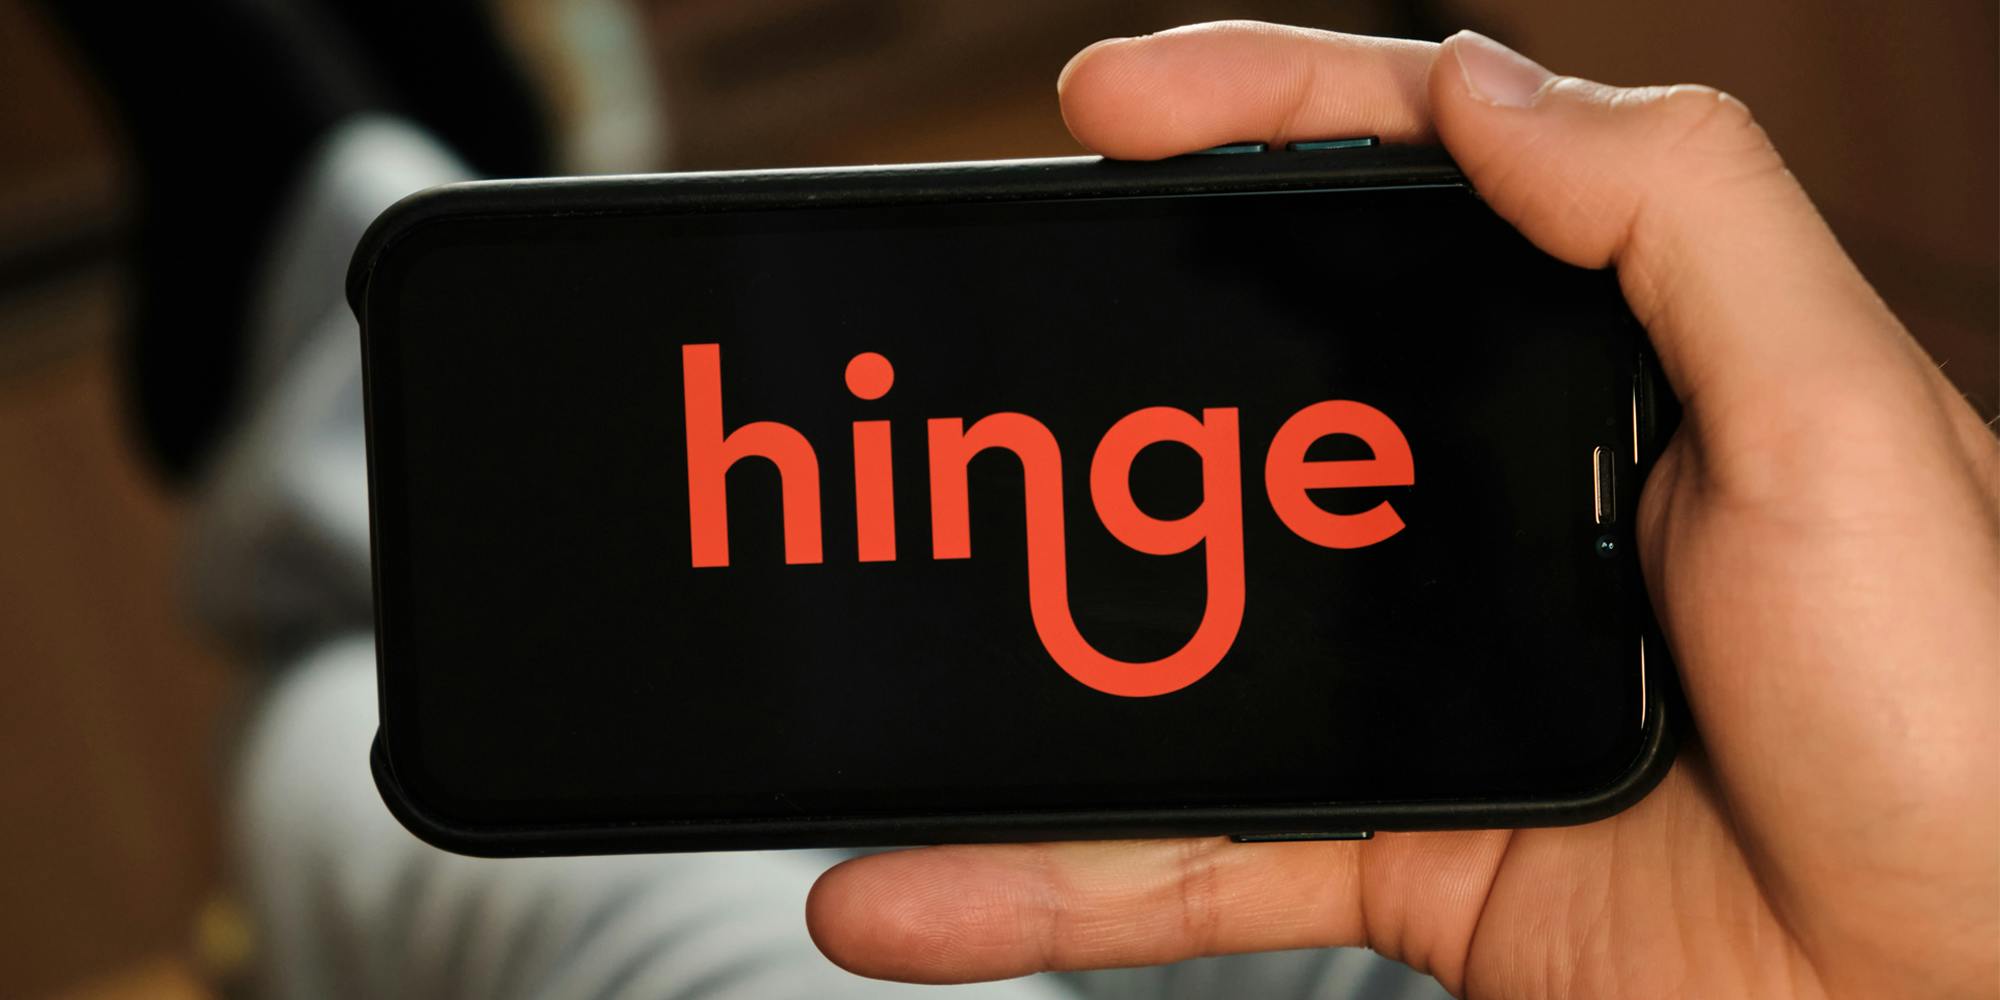 Hinge dating app on phone screen in hand